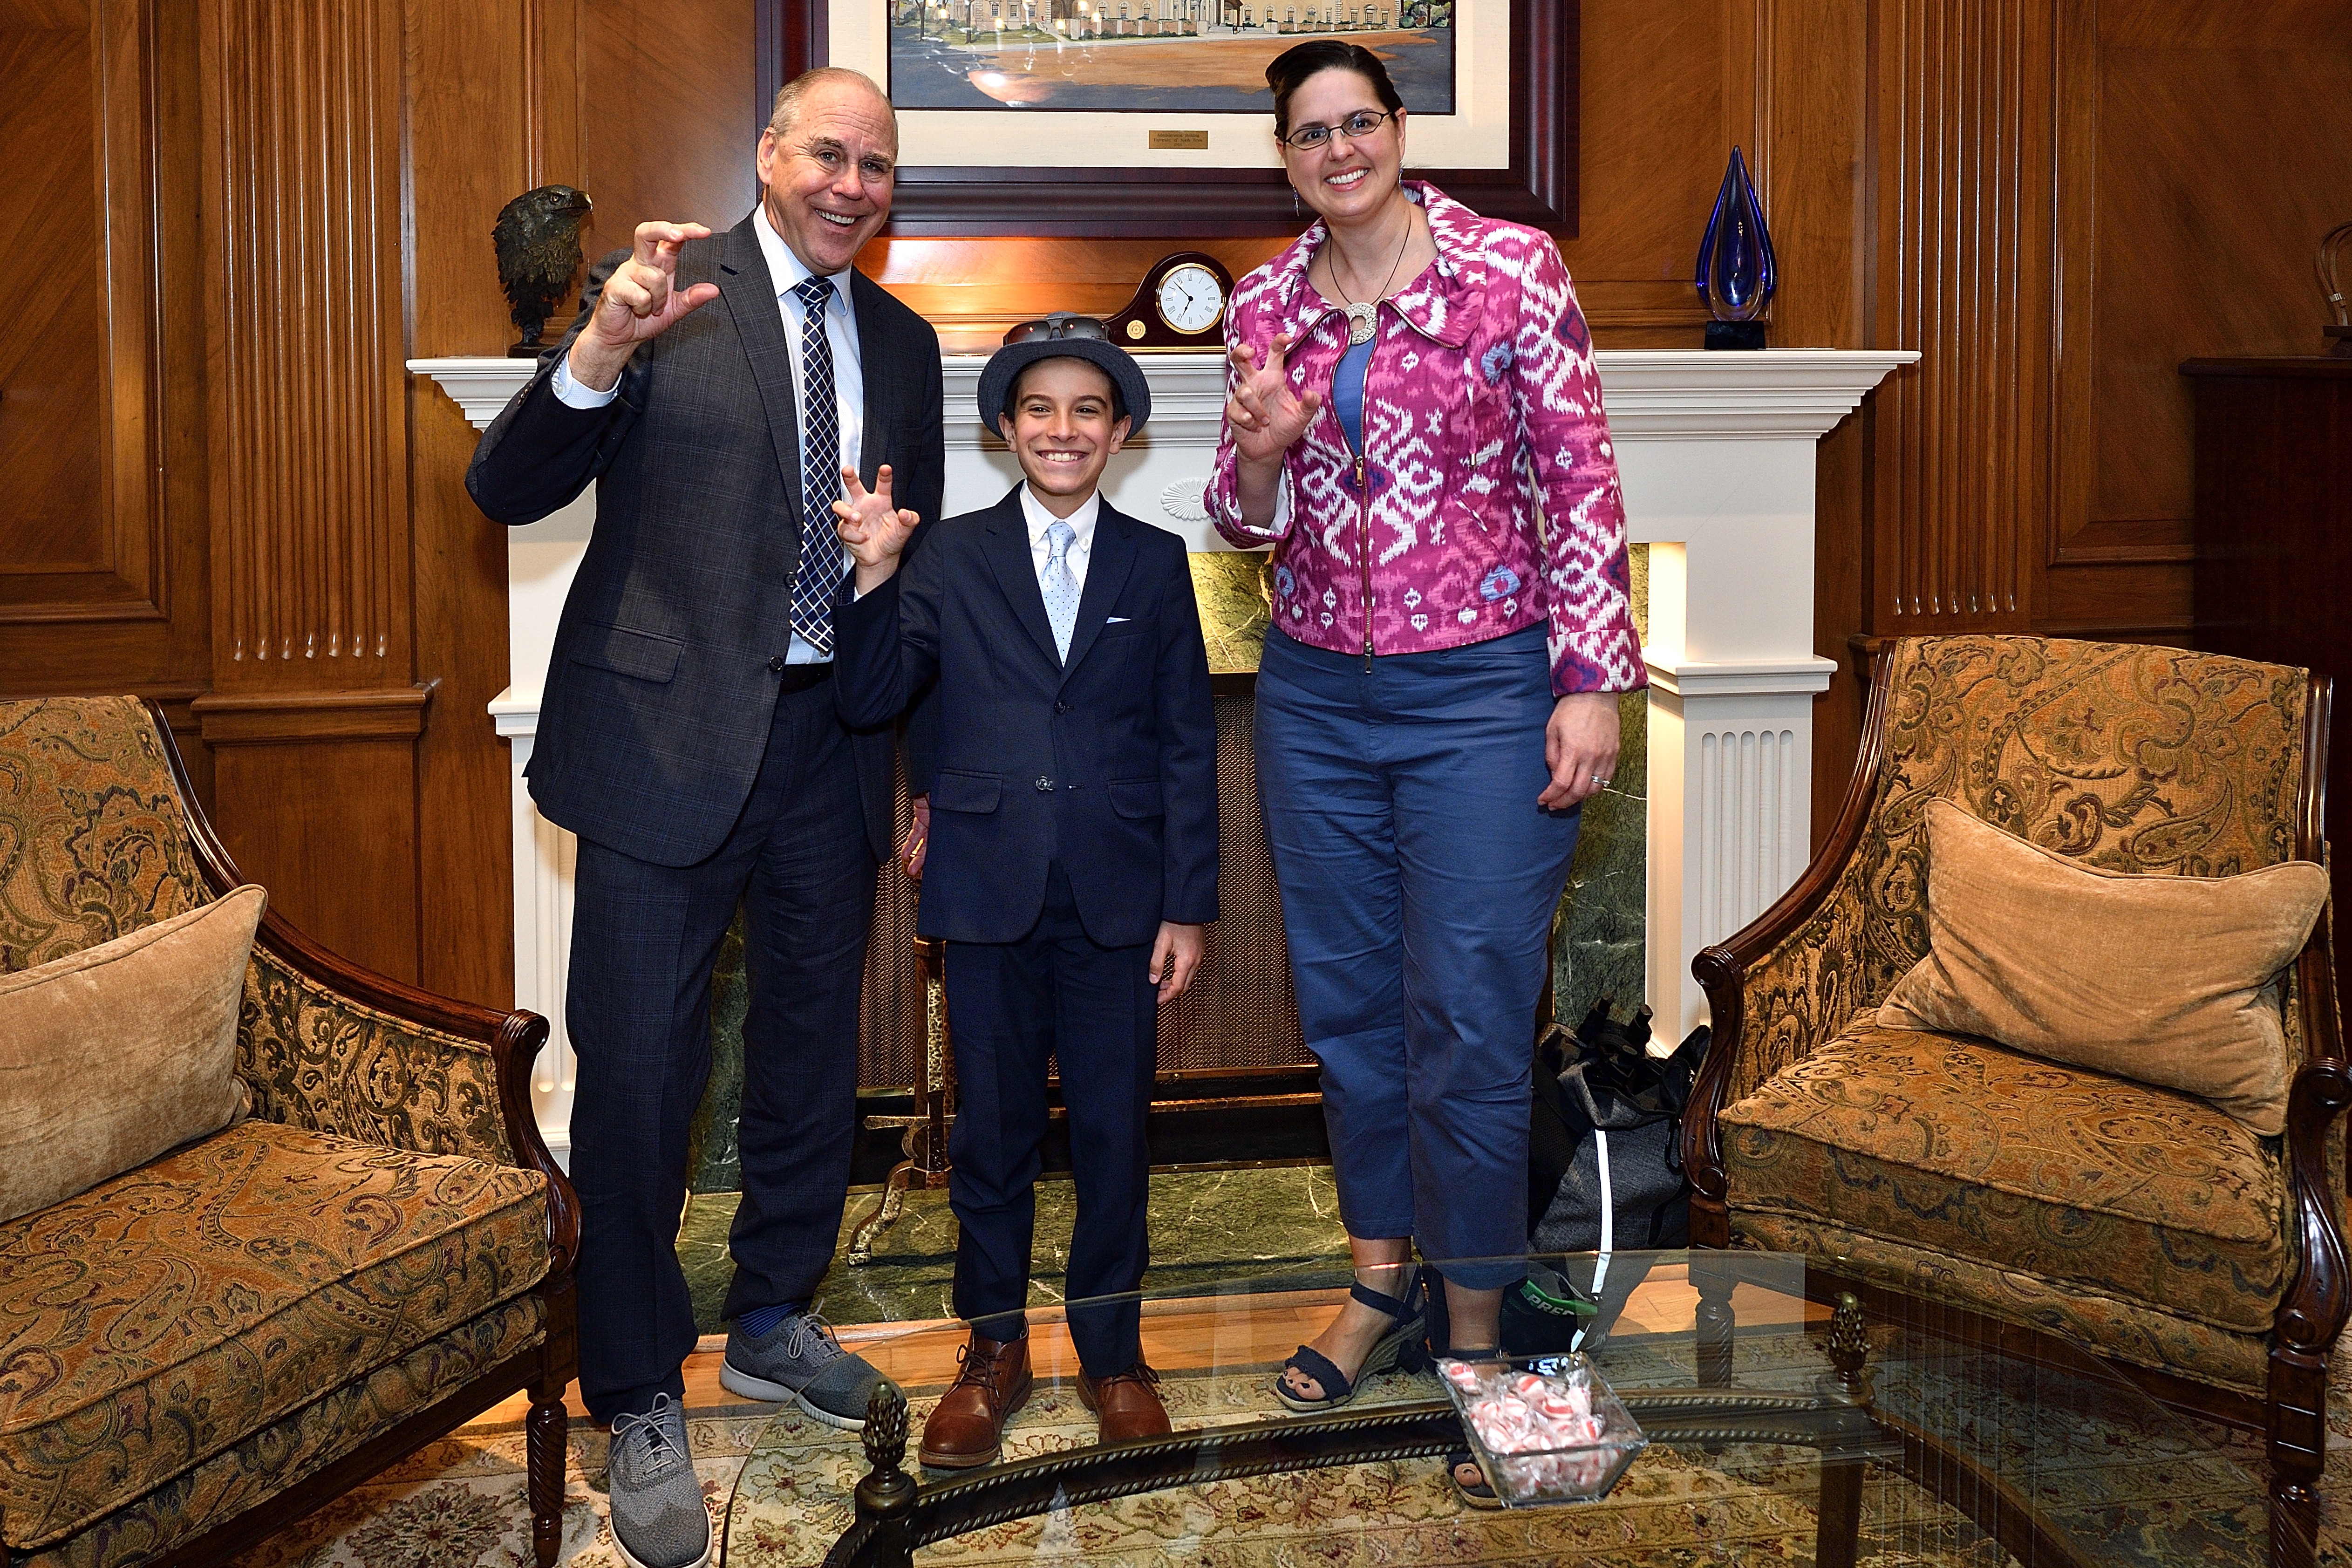 11-year-old Phoenix Legg visits with UNT President Smatresk and Provost Jennifer Cowly